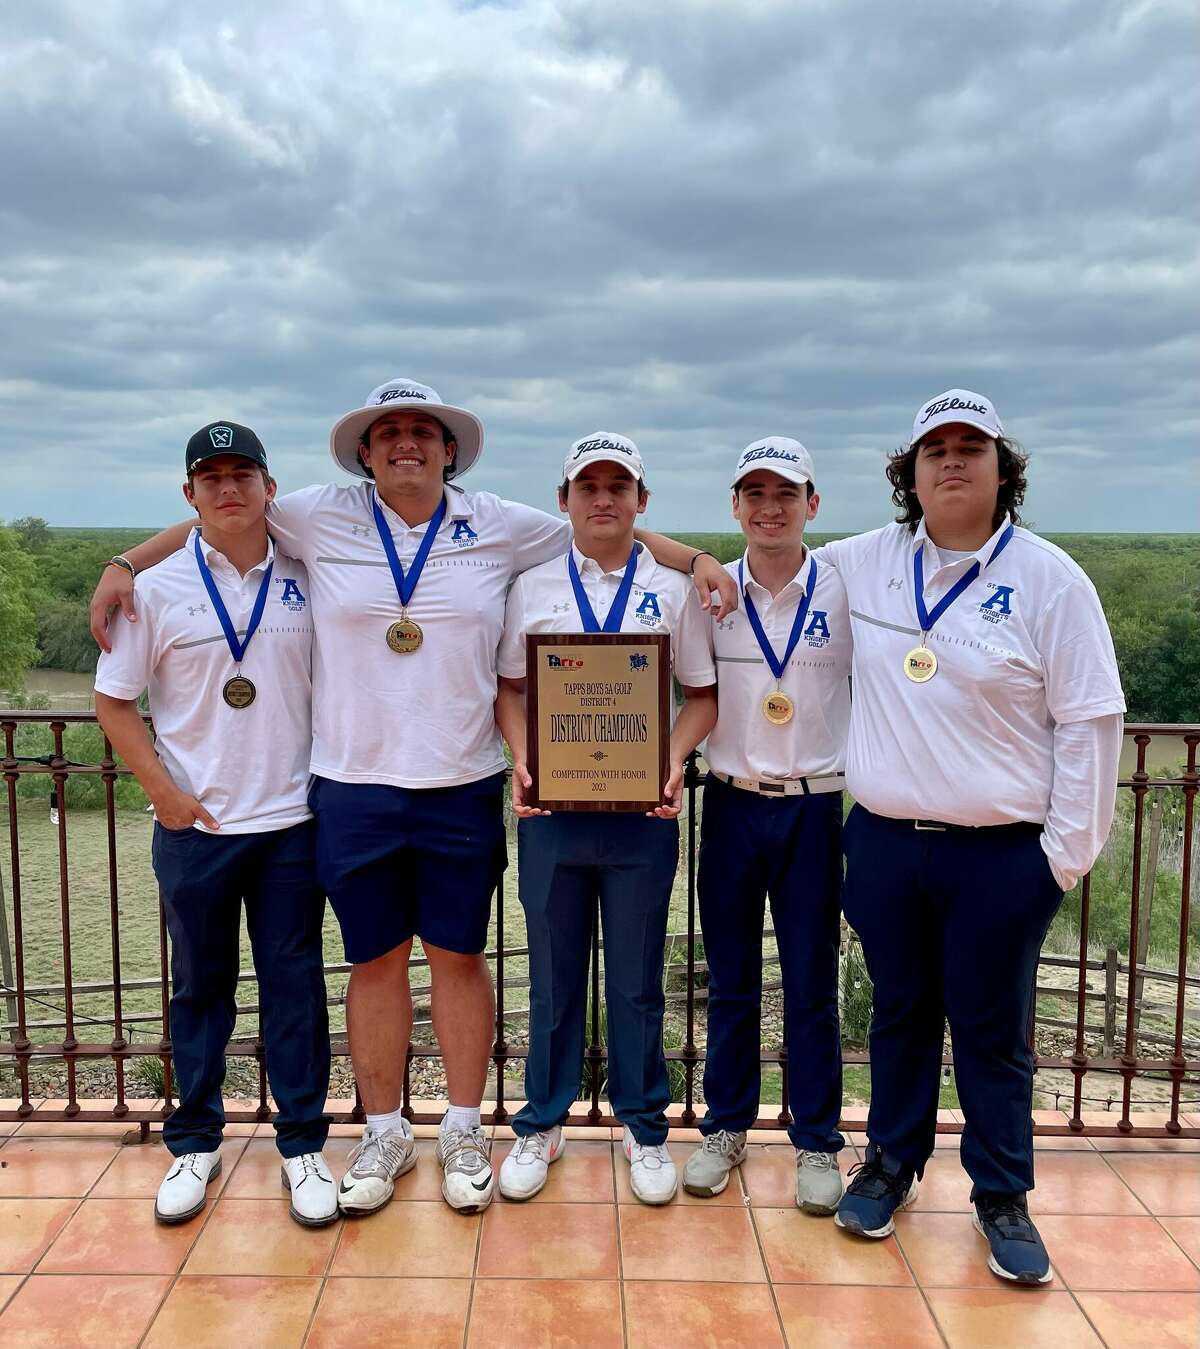 The St. Augustine boys' golf team won the TAPPS District 4-5A title on Monday.